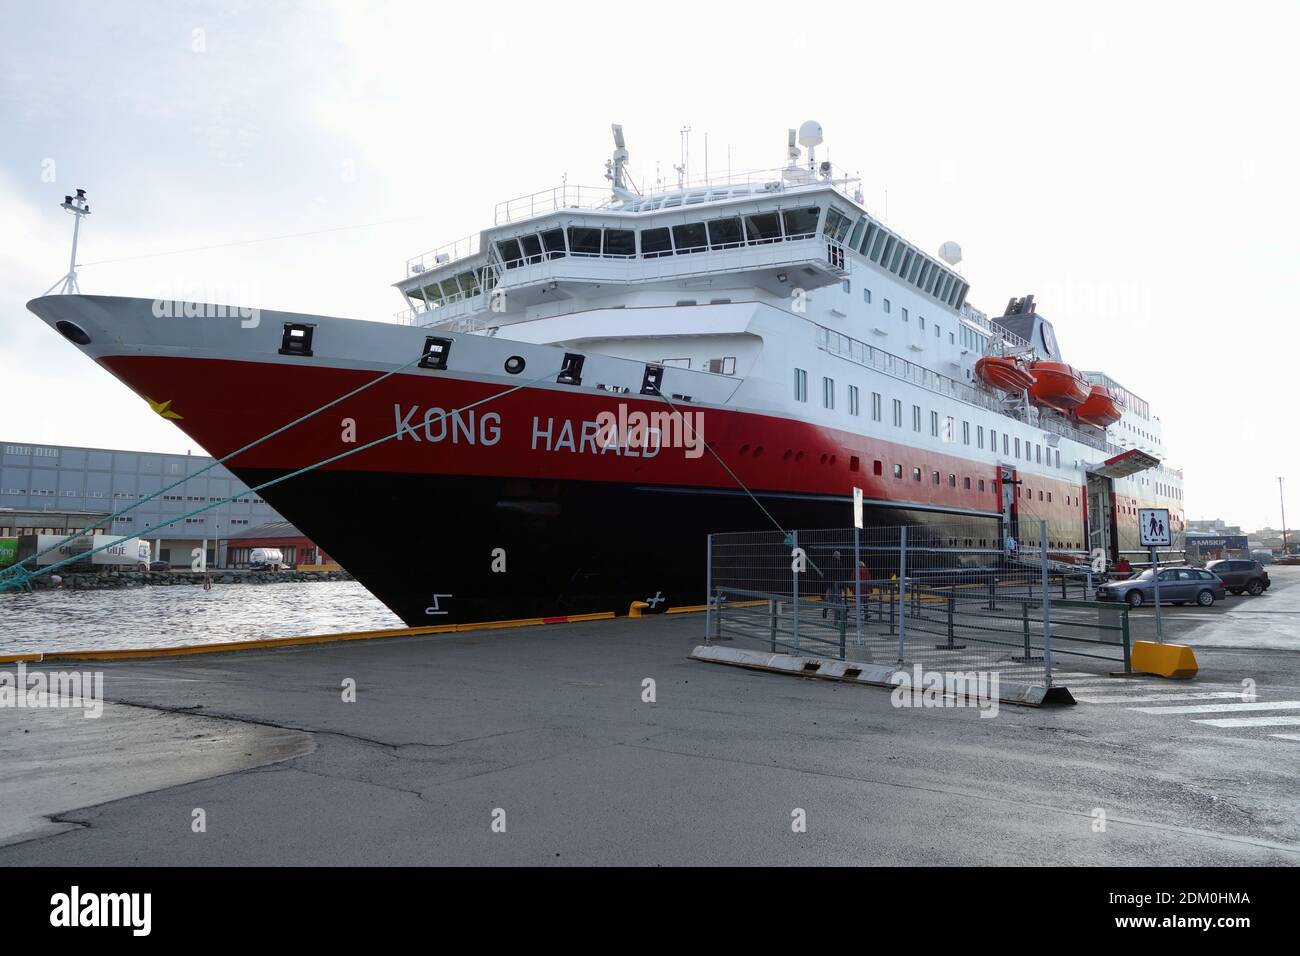 Norway November 2018 Tromso   On board the Kong Harald Cruise Ship which is part of the Hurtigruten fleet, on a voyage from Bergen to Kirkenes in Norw Stock Photo